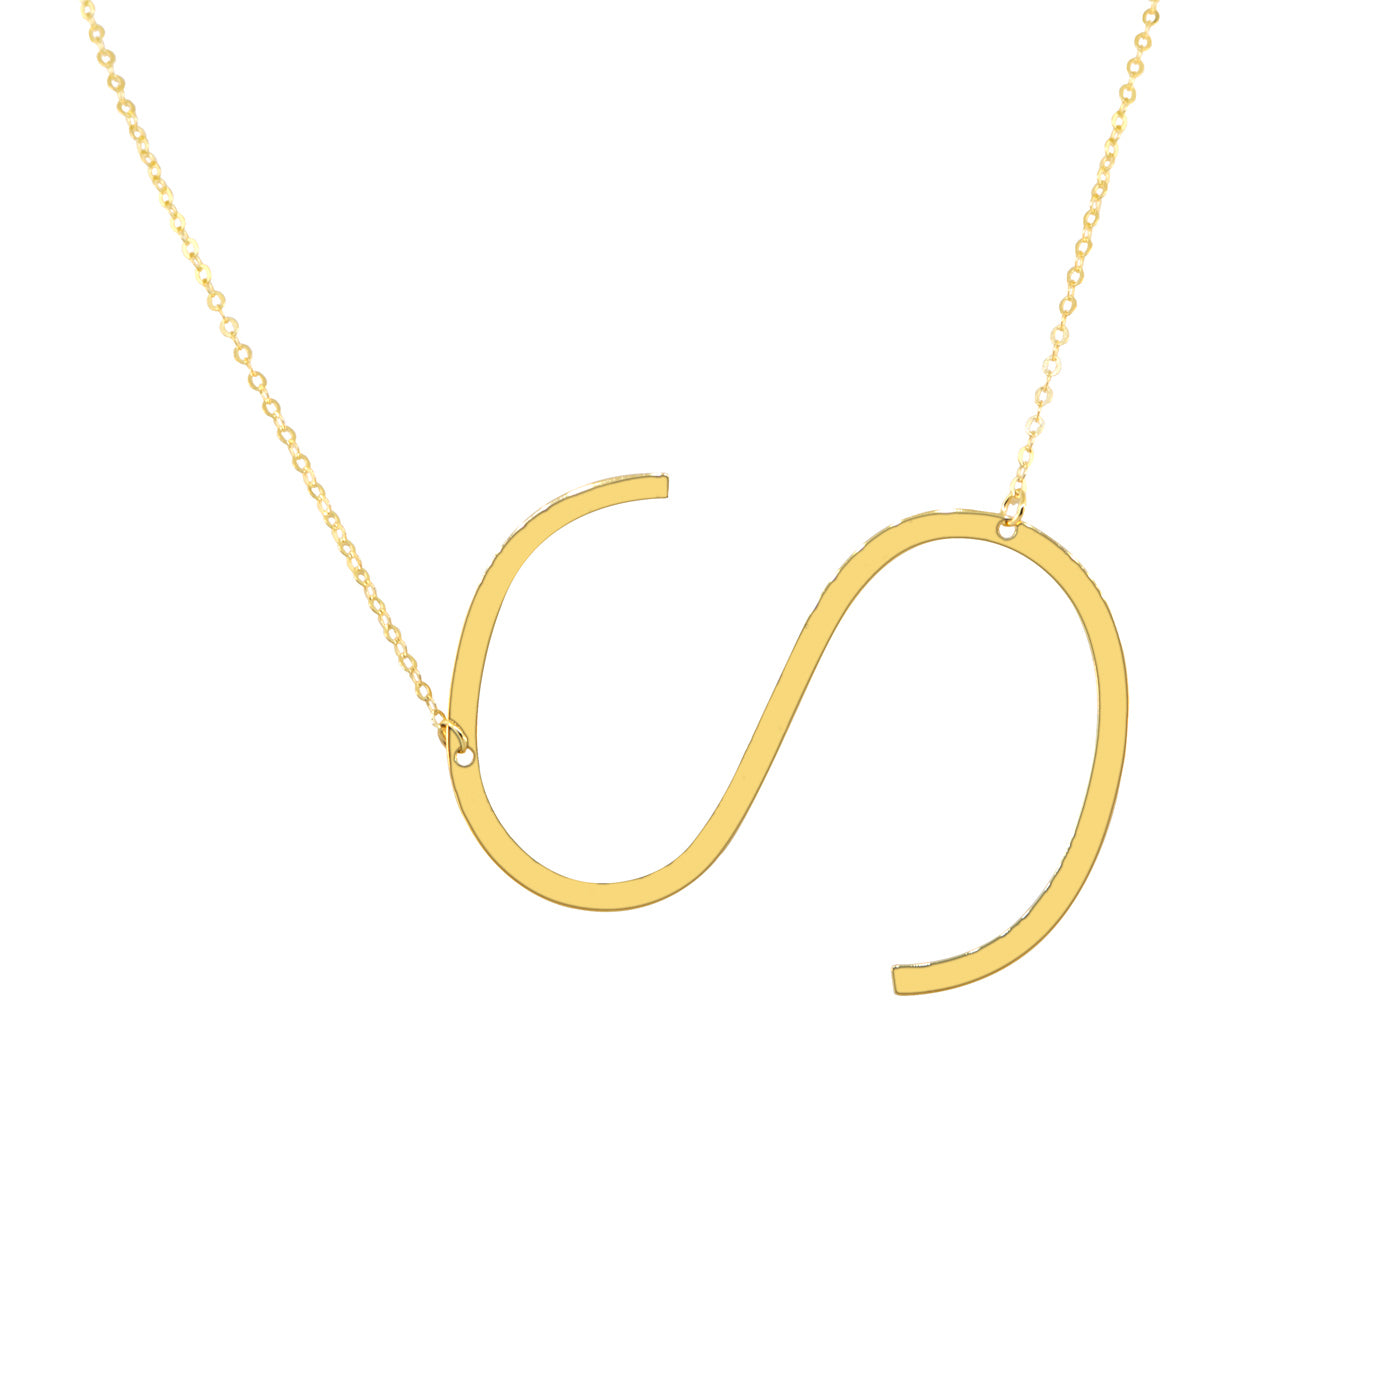 Buy Sideways Initial Necklace, Initial Necklace, Letter Necklace,  Bridesmaid Jewelry, Personalized Necklace, Custom Necklace, Mom Necklace  Online in India - Etsy